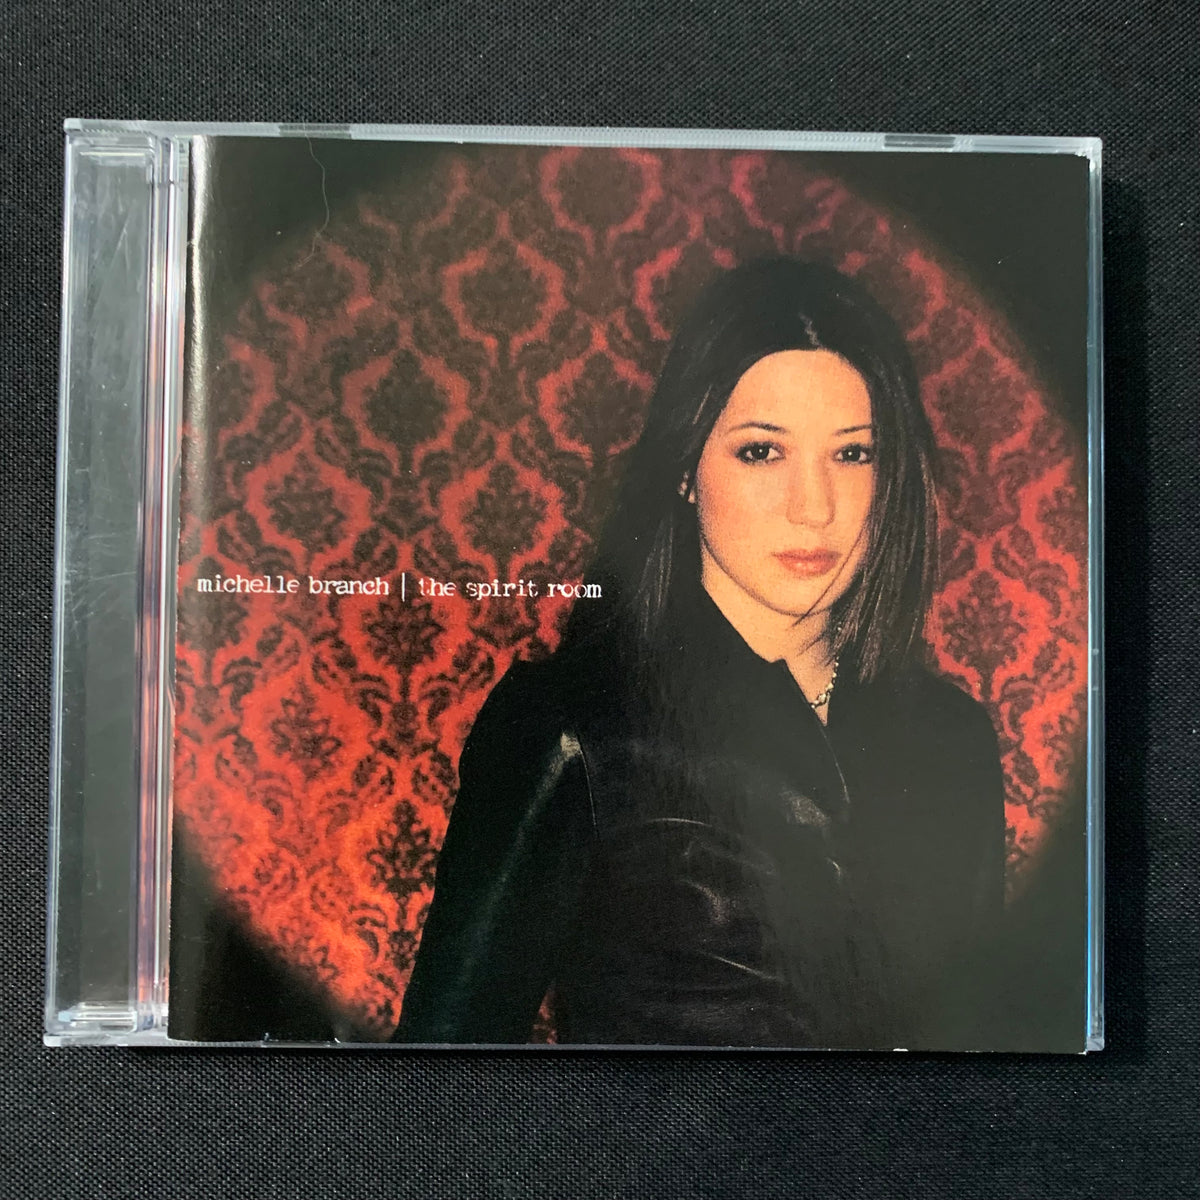 263. Everywhere by Michelle Branch — Reminiscent